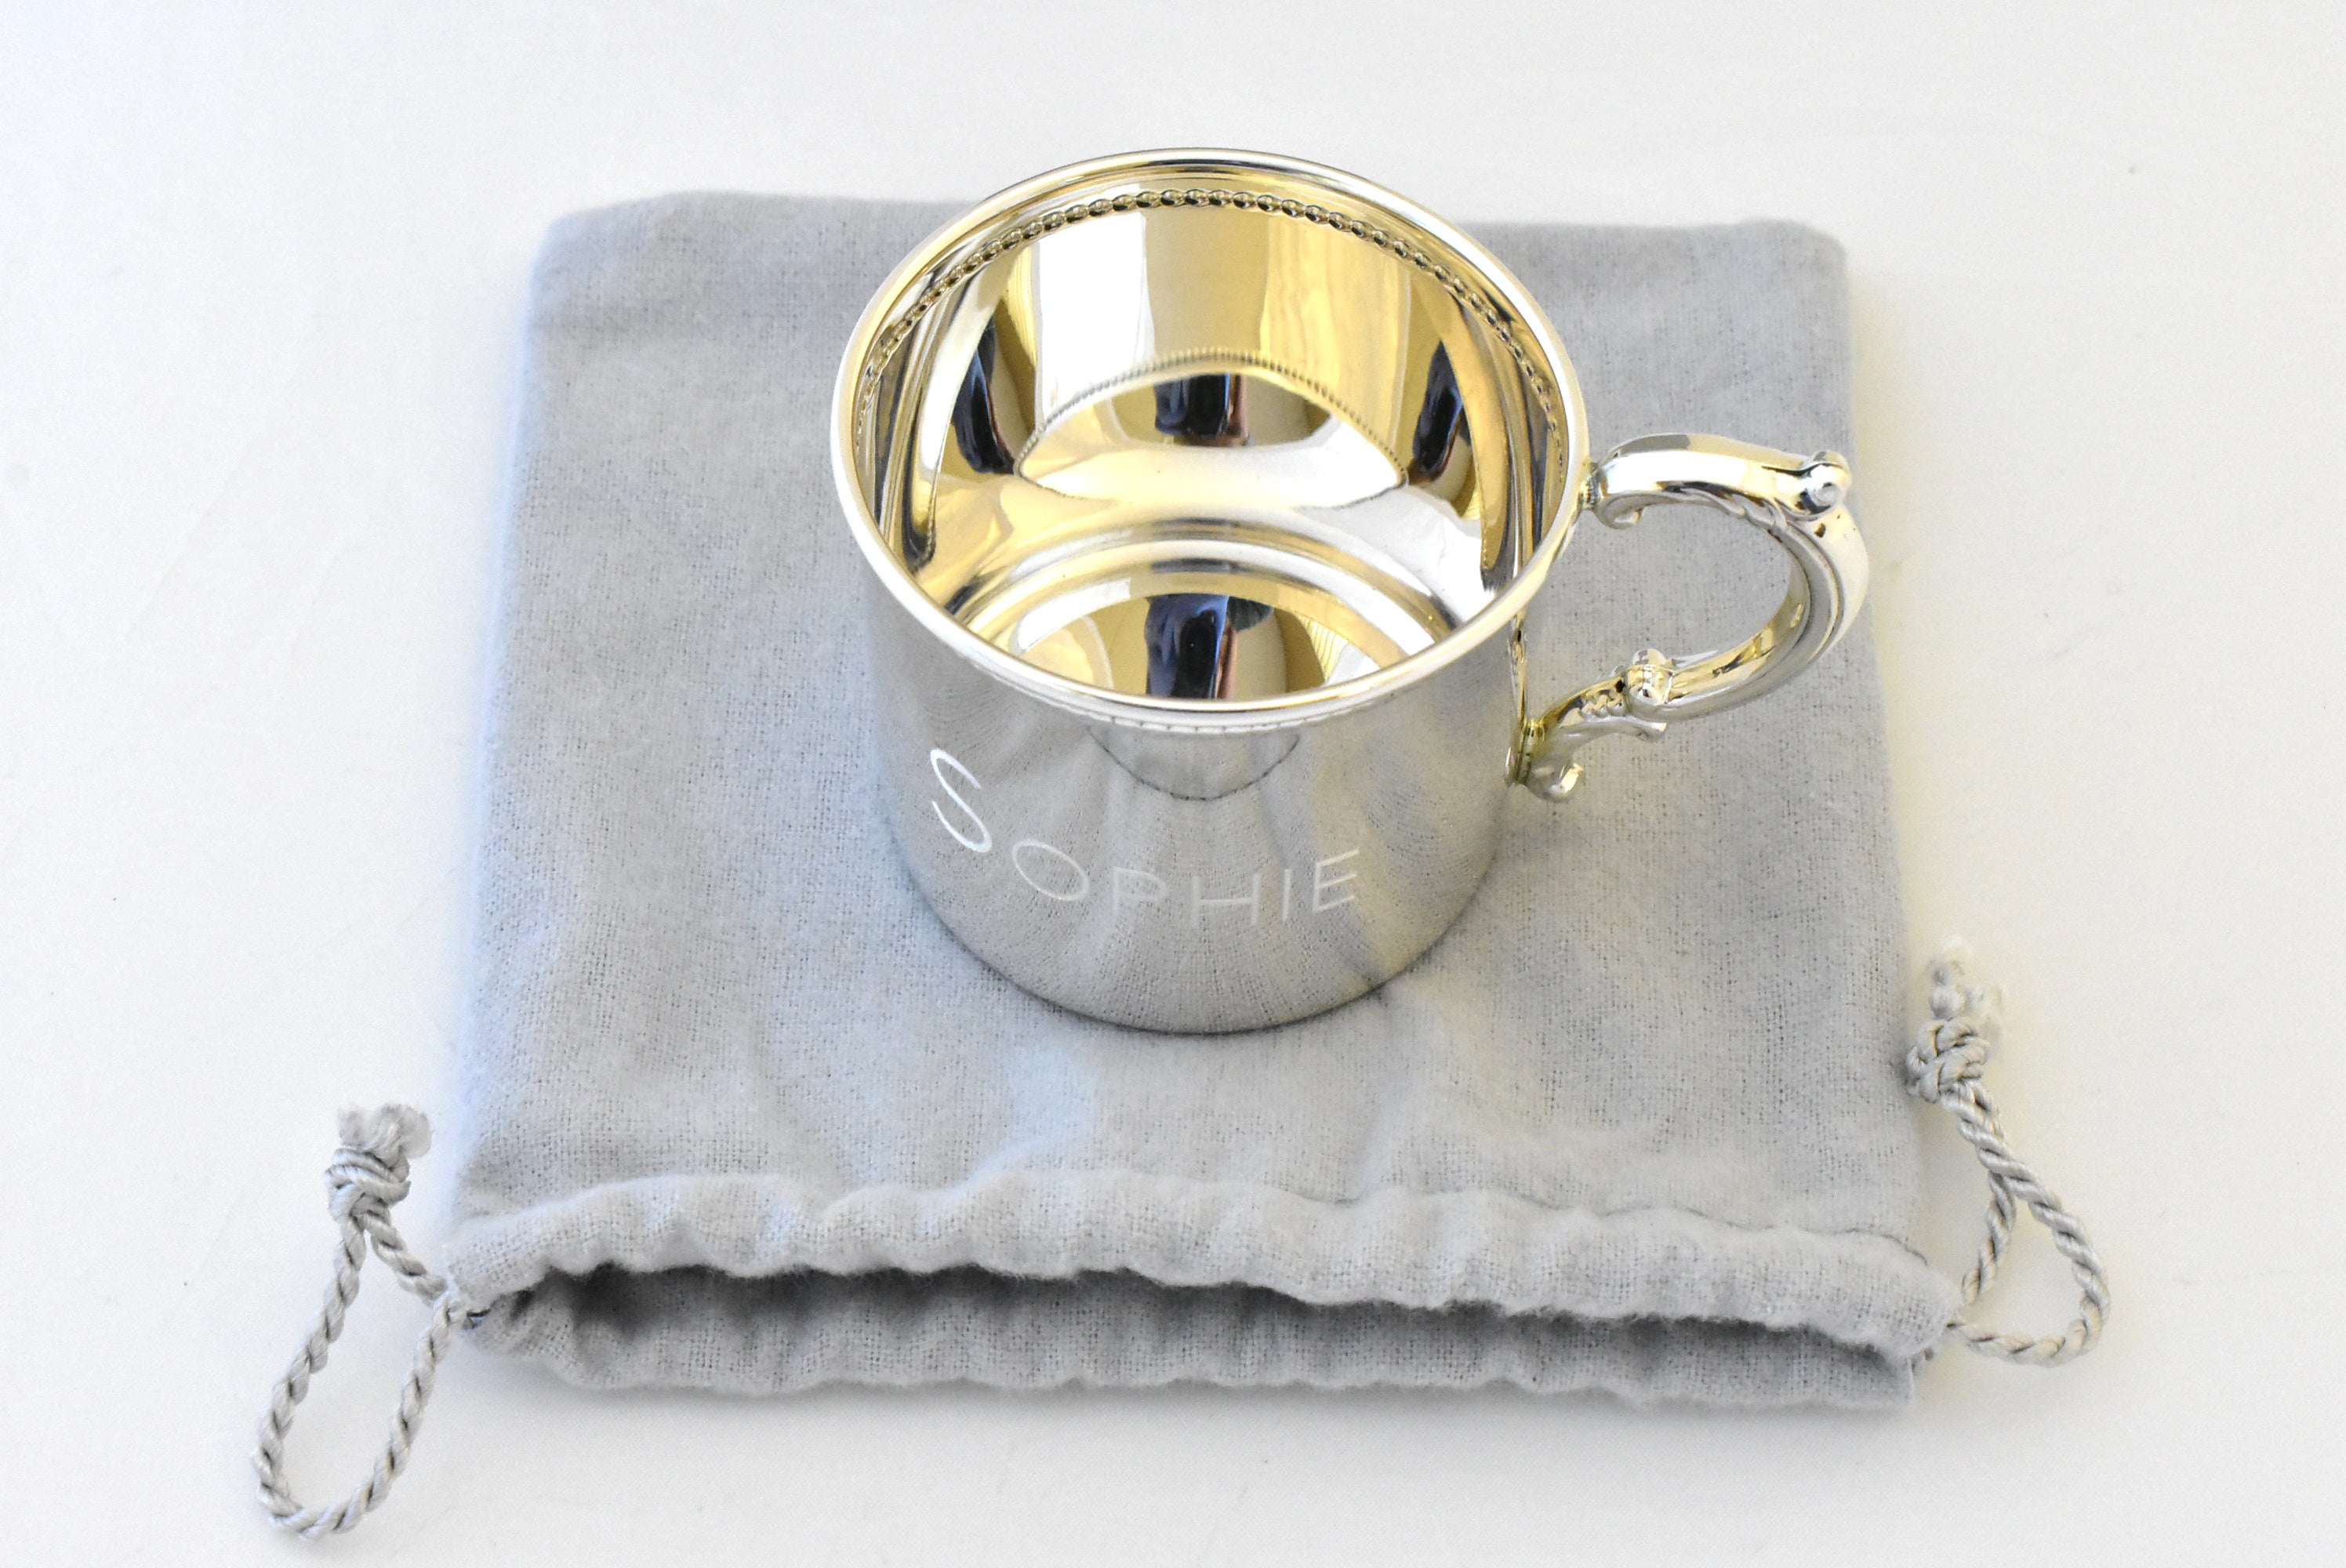 Sterling Silver Baby or Child Beaded Cup Heirloom Gift Engraved Personalized Monogram